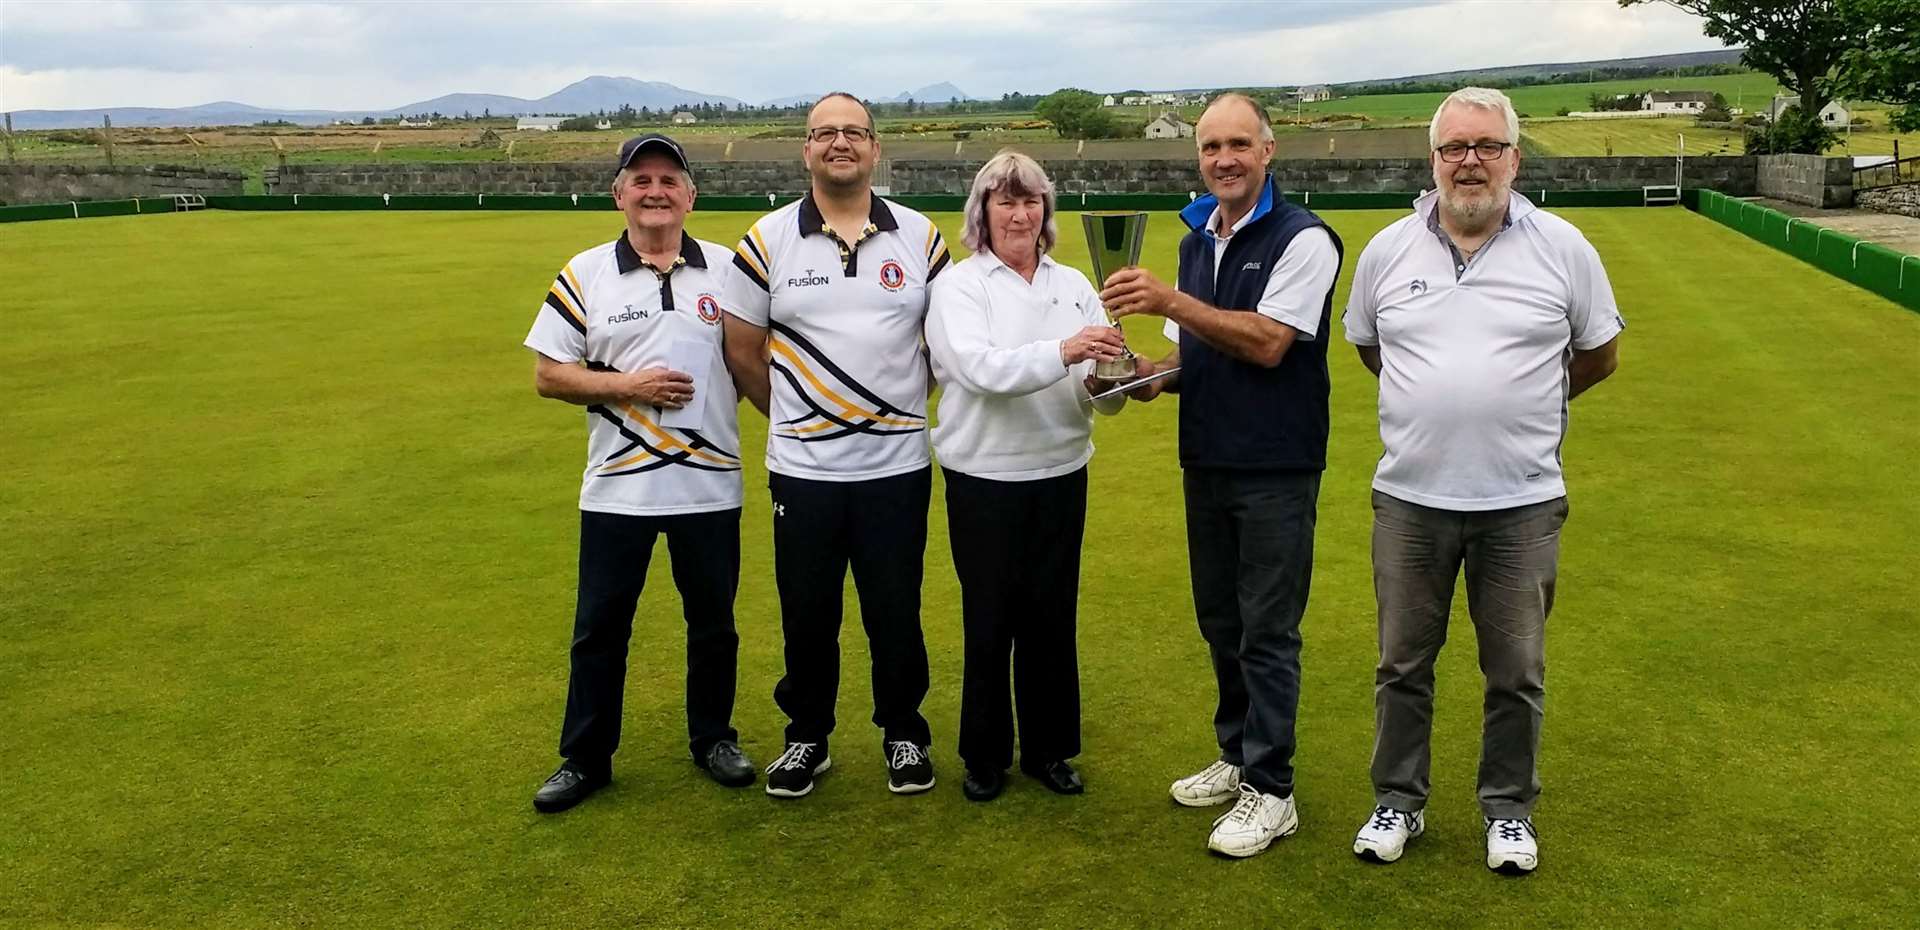 From left: Runners-up Ali Gray and Stephen Rollinson (Thurso), Fran Manners, the Lybster president, presenting the Mabbutt Open Pairs trophy to winners John Grant and Marshall Bowman (Lybster).